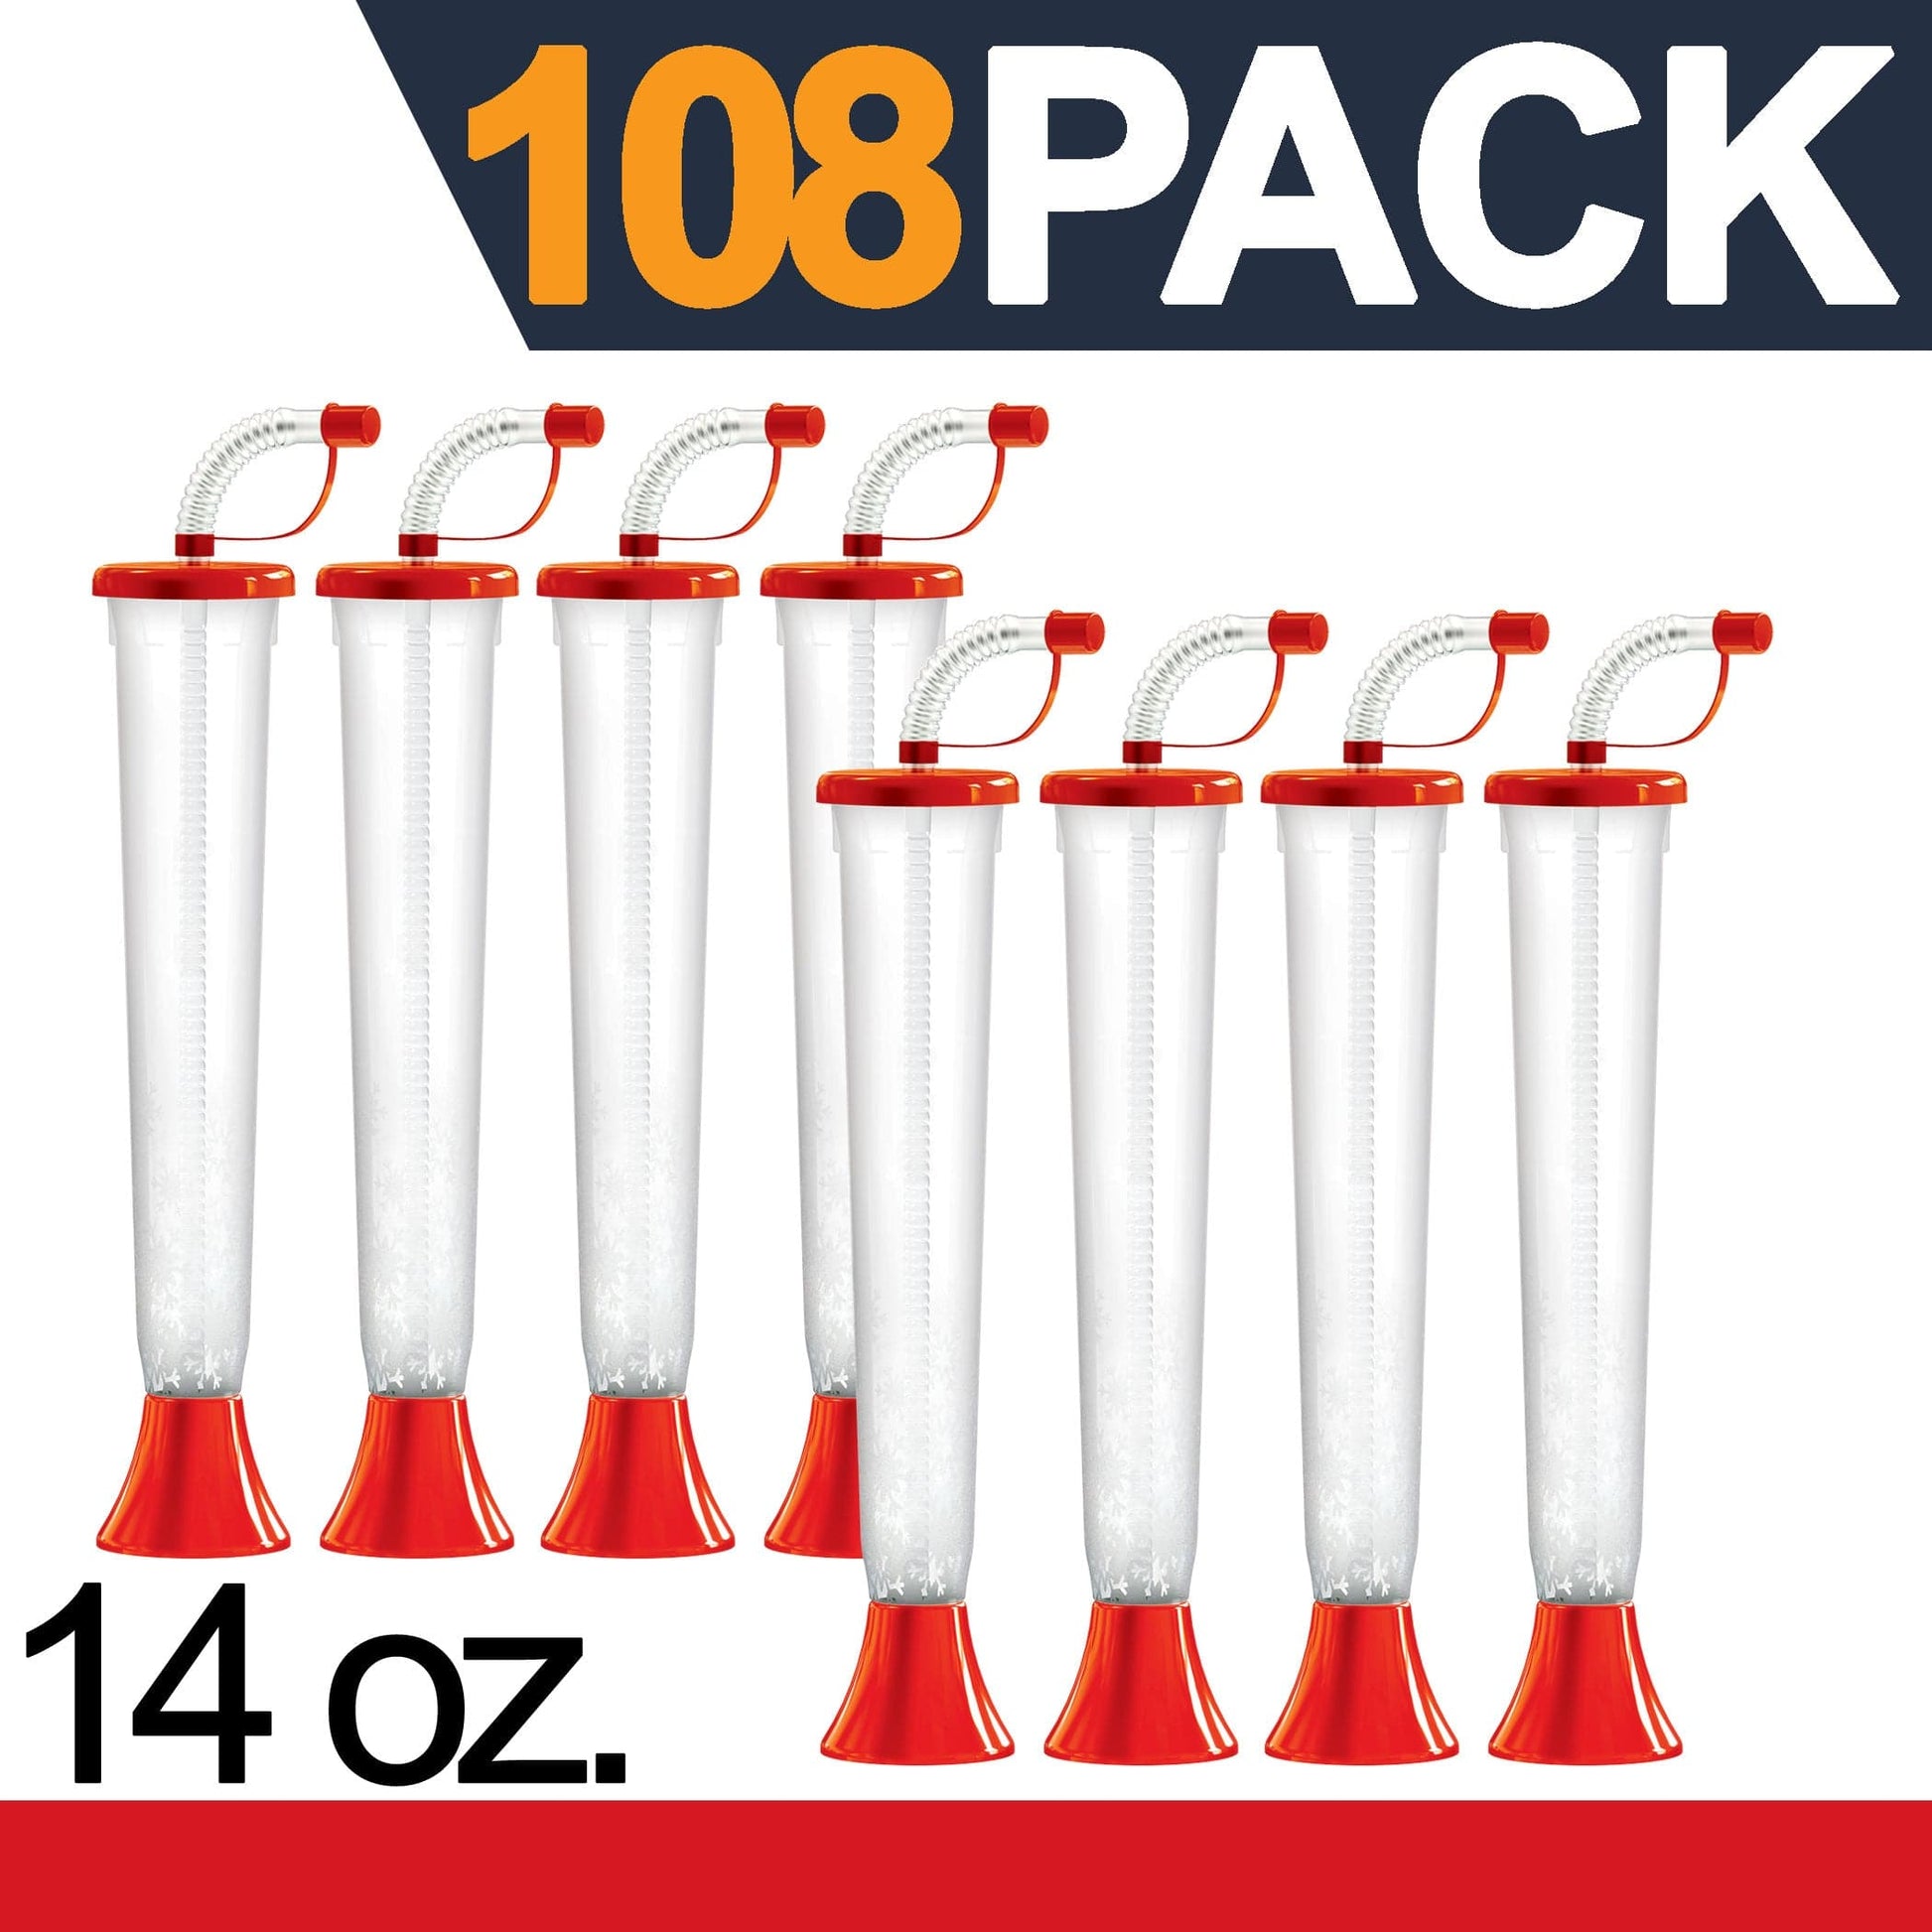 Yard Cups for Kids (108 Cups - Red Lids) - for Cold and Frozen Drinks Kids Parties - 9oz/250ml